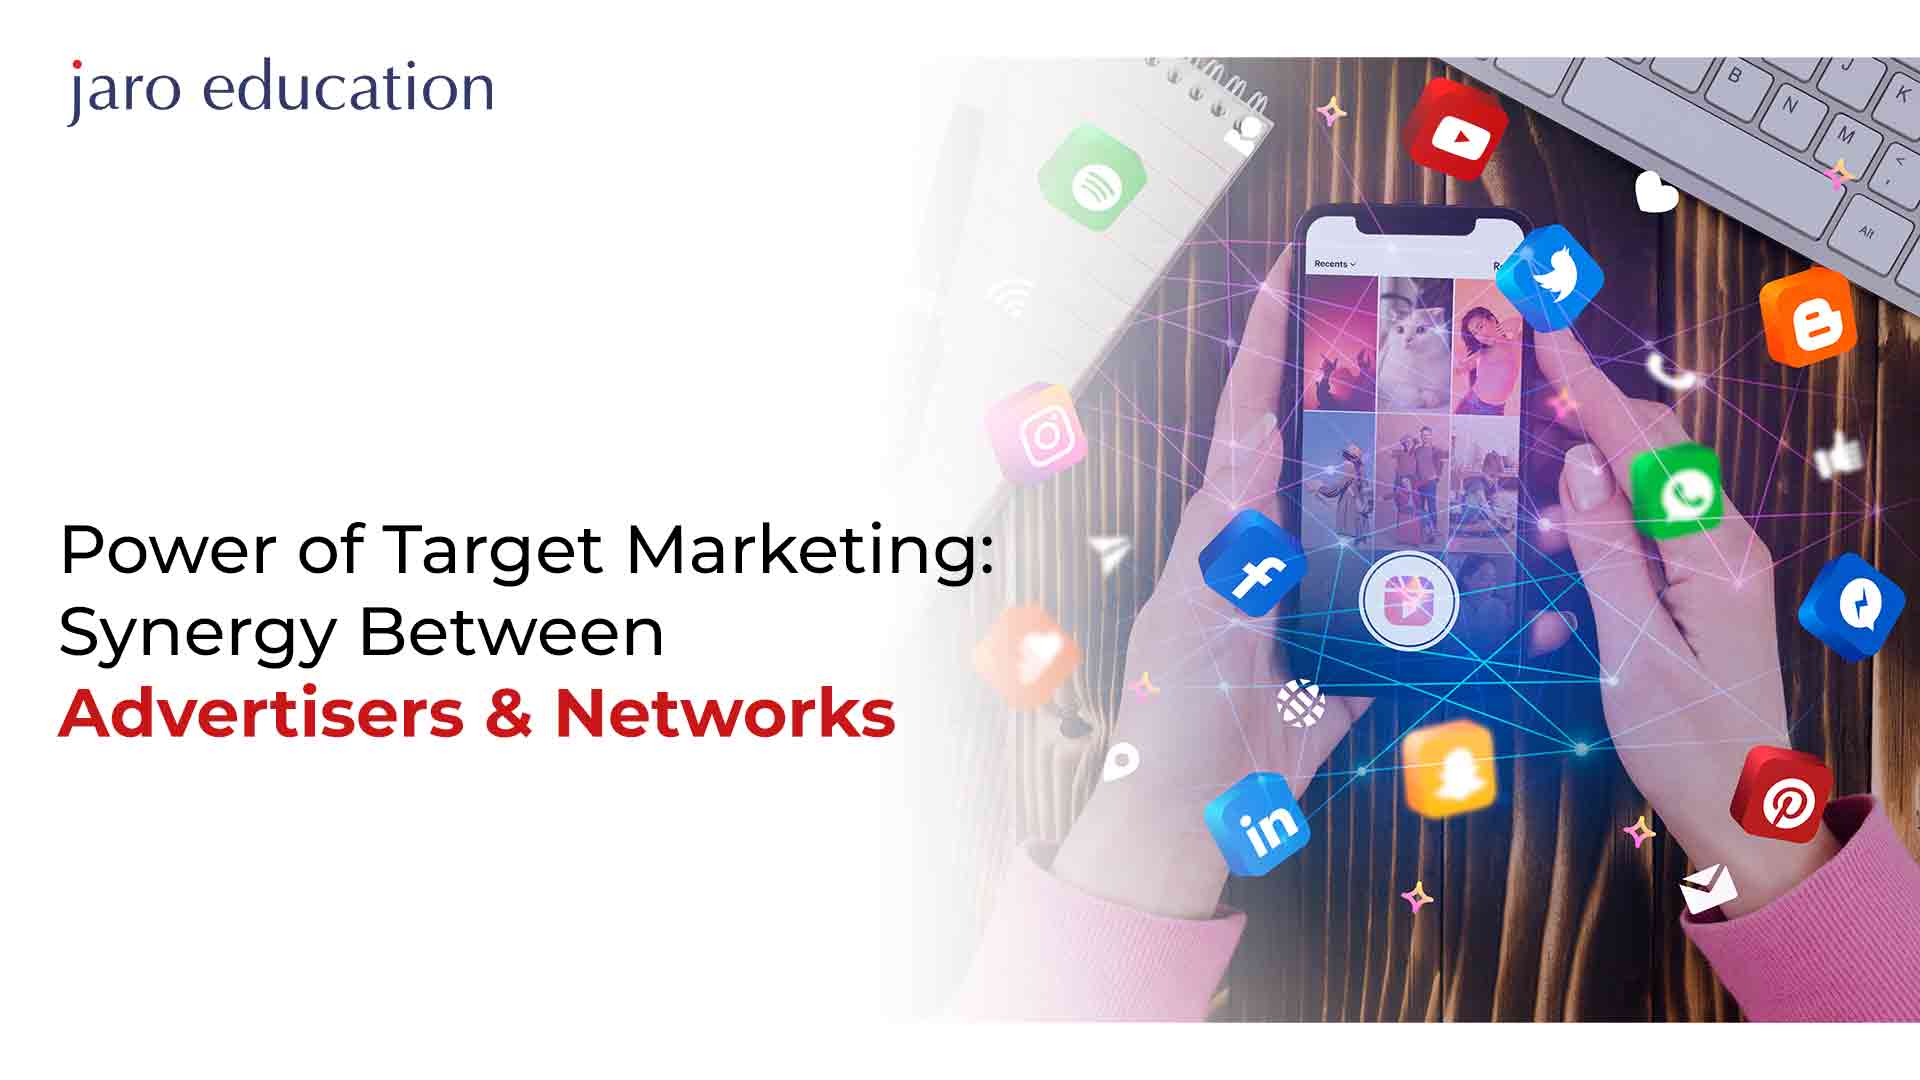 Power of Target Marketing Synergy Between Advertisers & Networks